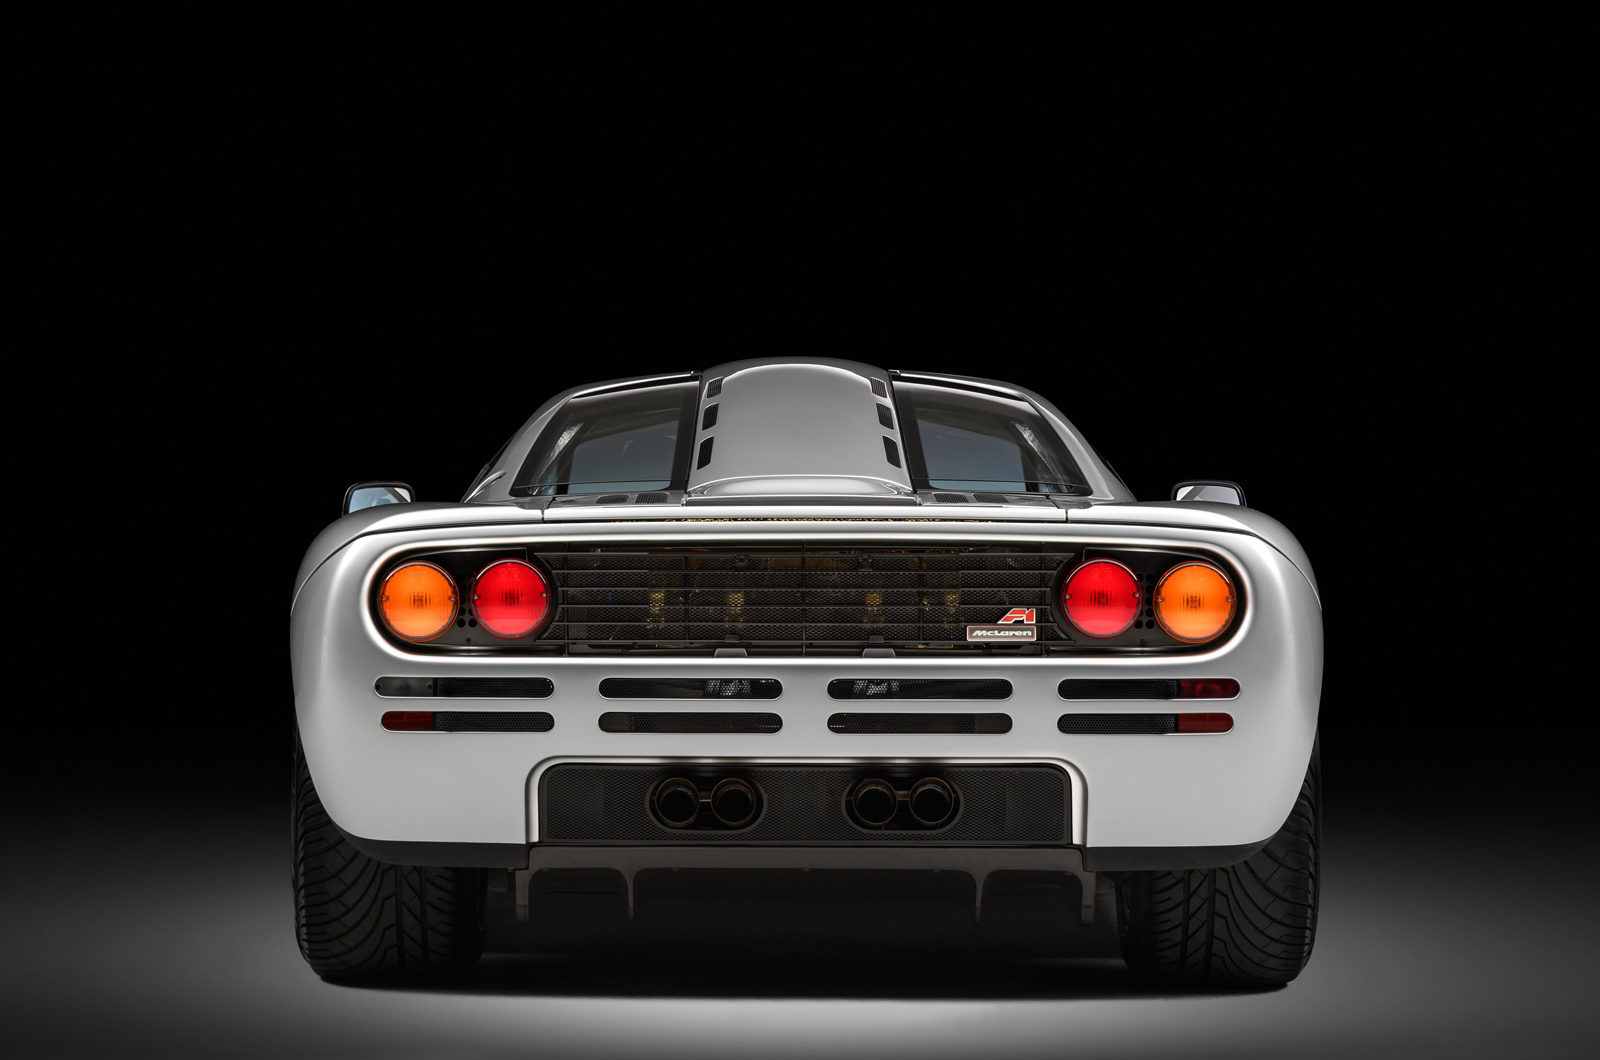 Classic & Sports Car – Restored McLaren F1 set for Concours of Elegance debut